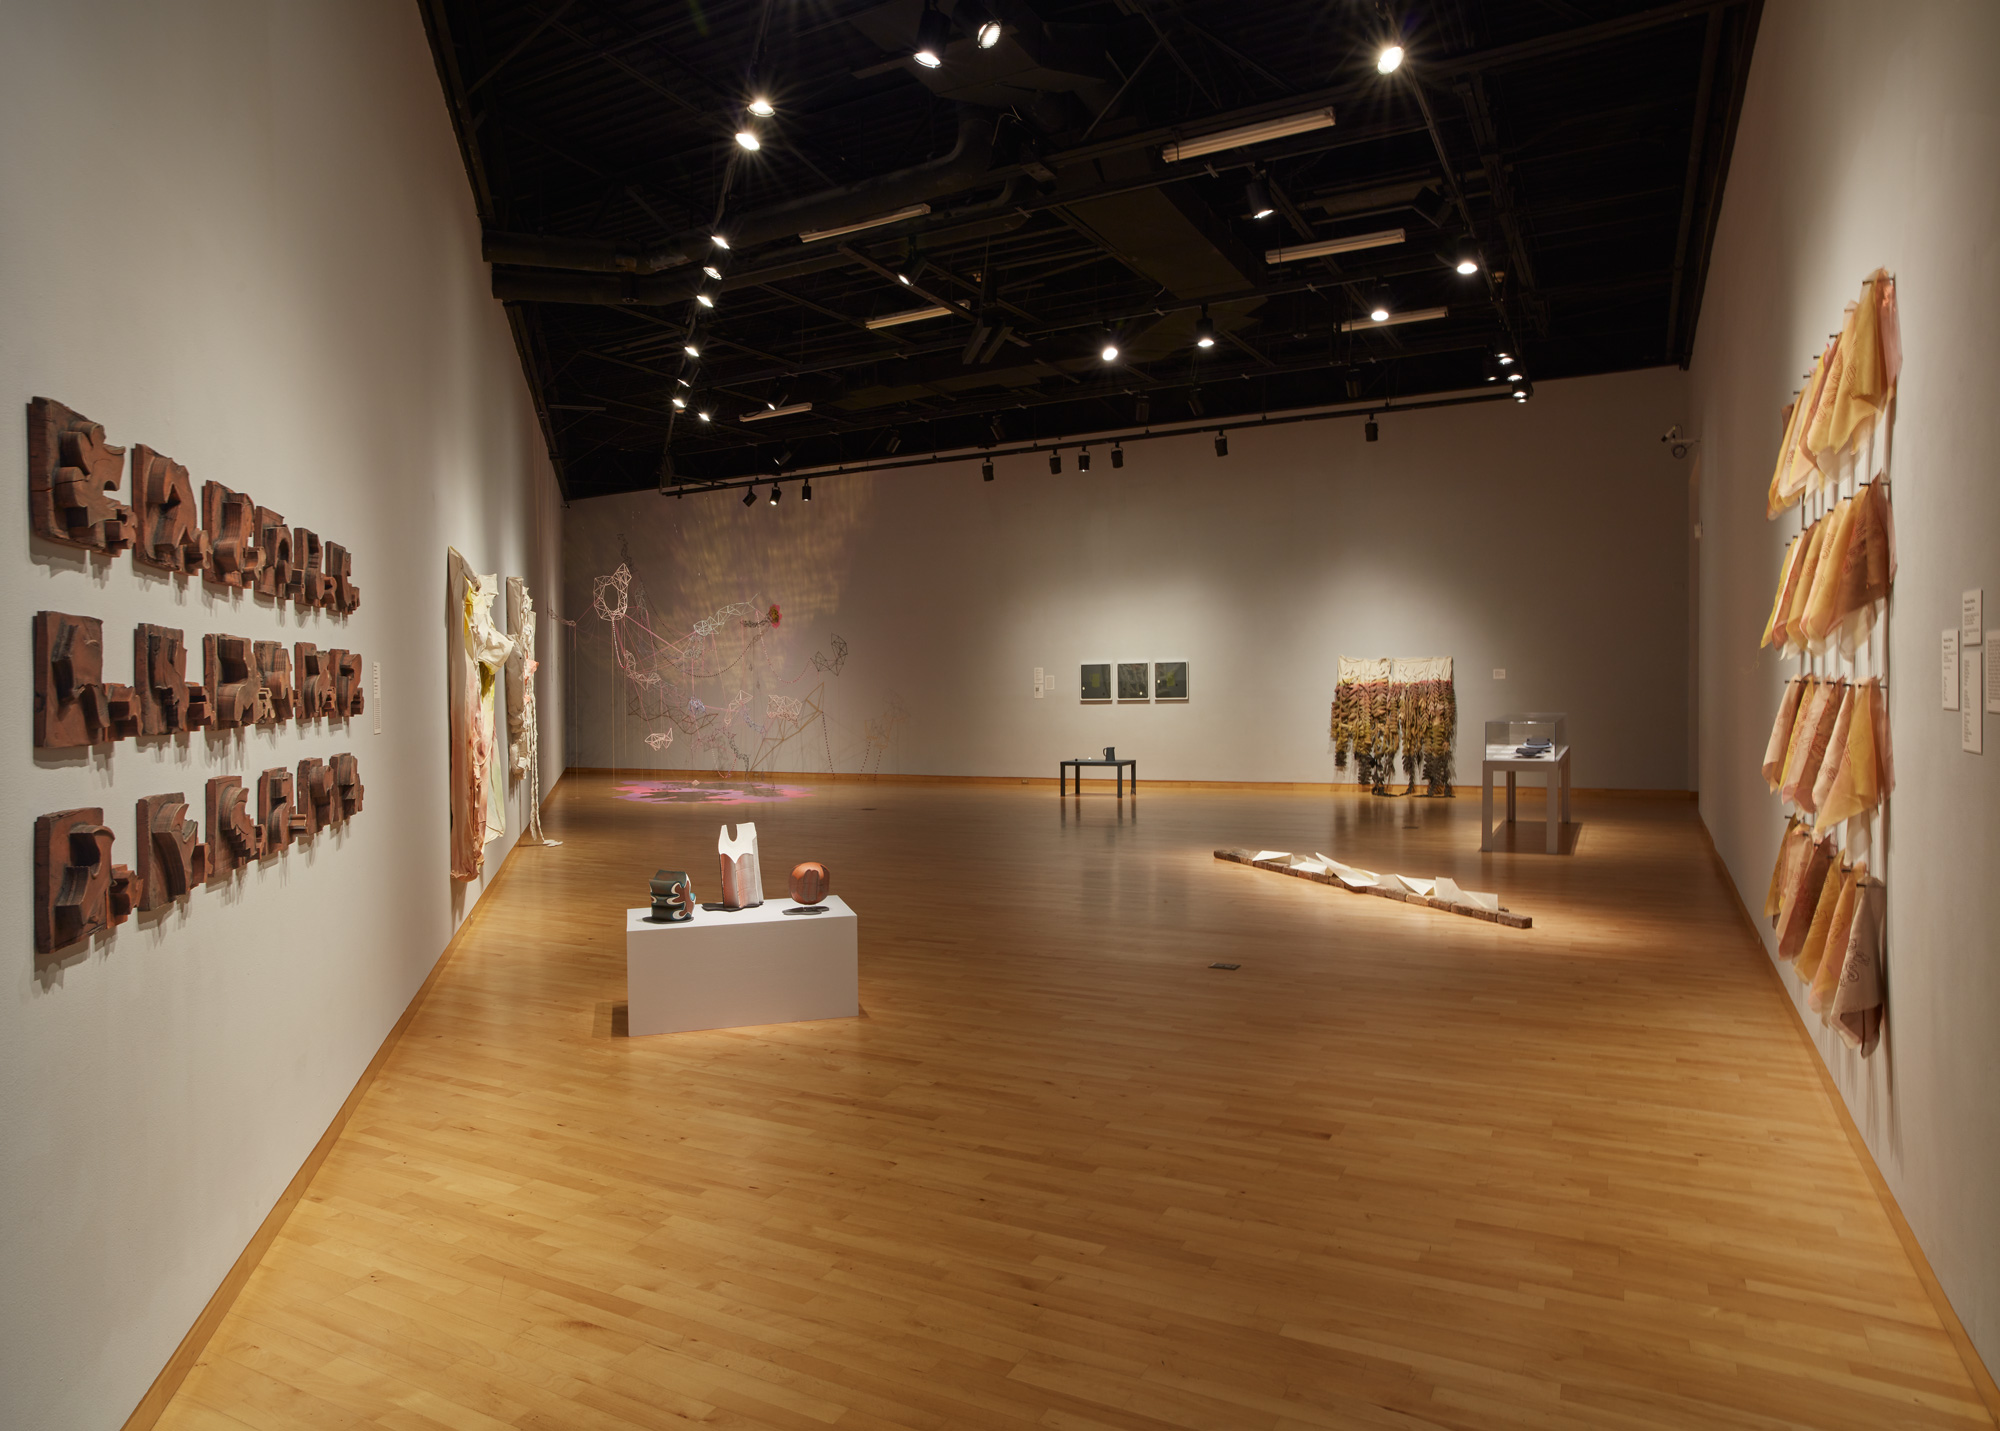 Installation view of Skyway 20/21 exhibition at USF Contemporary Art Museum. Left to right: works by Kodi Thompson, Cynthia Mason, Casey McDonough, Ry McCollough, Cynthia Mason, and Rosemarie Chiarlone. Photo: Will Lytch.